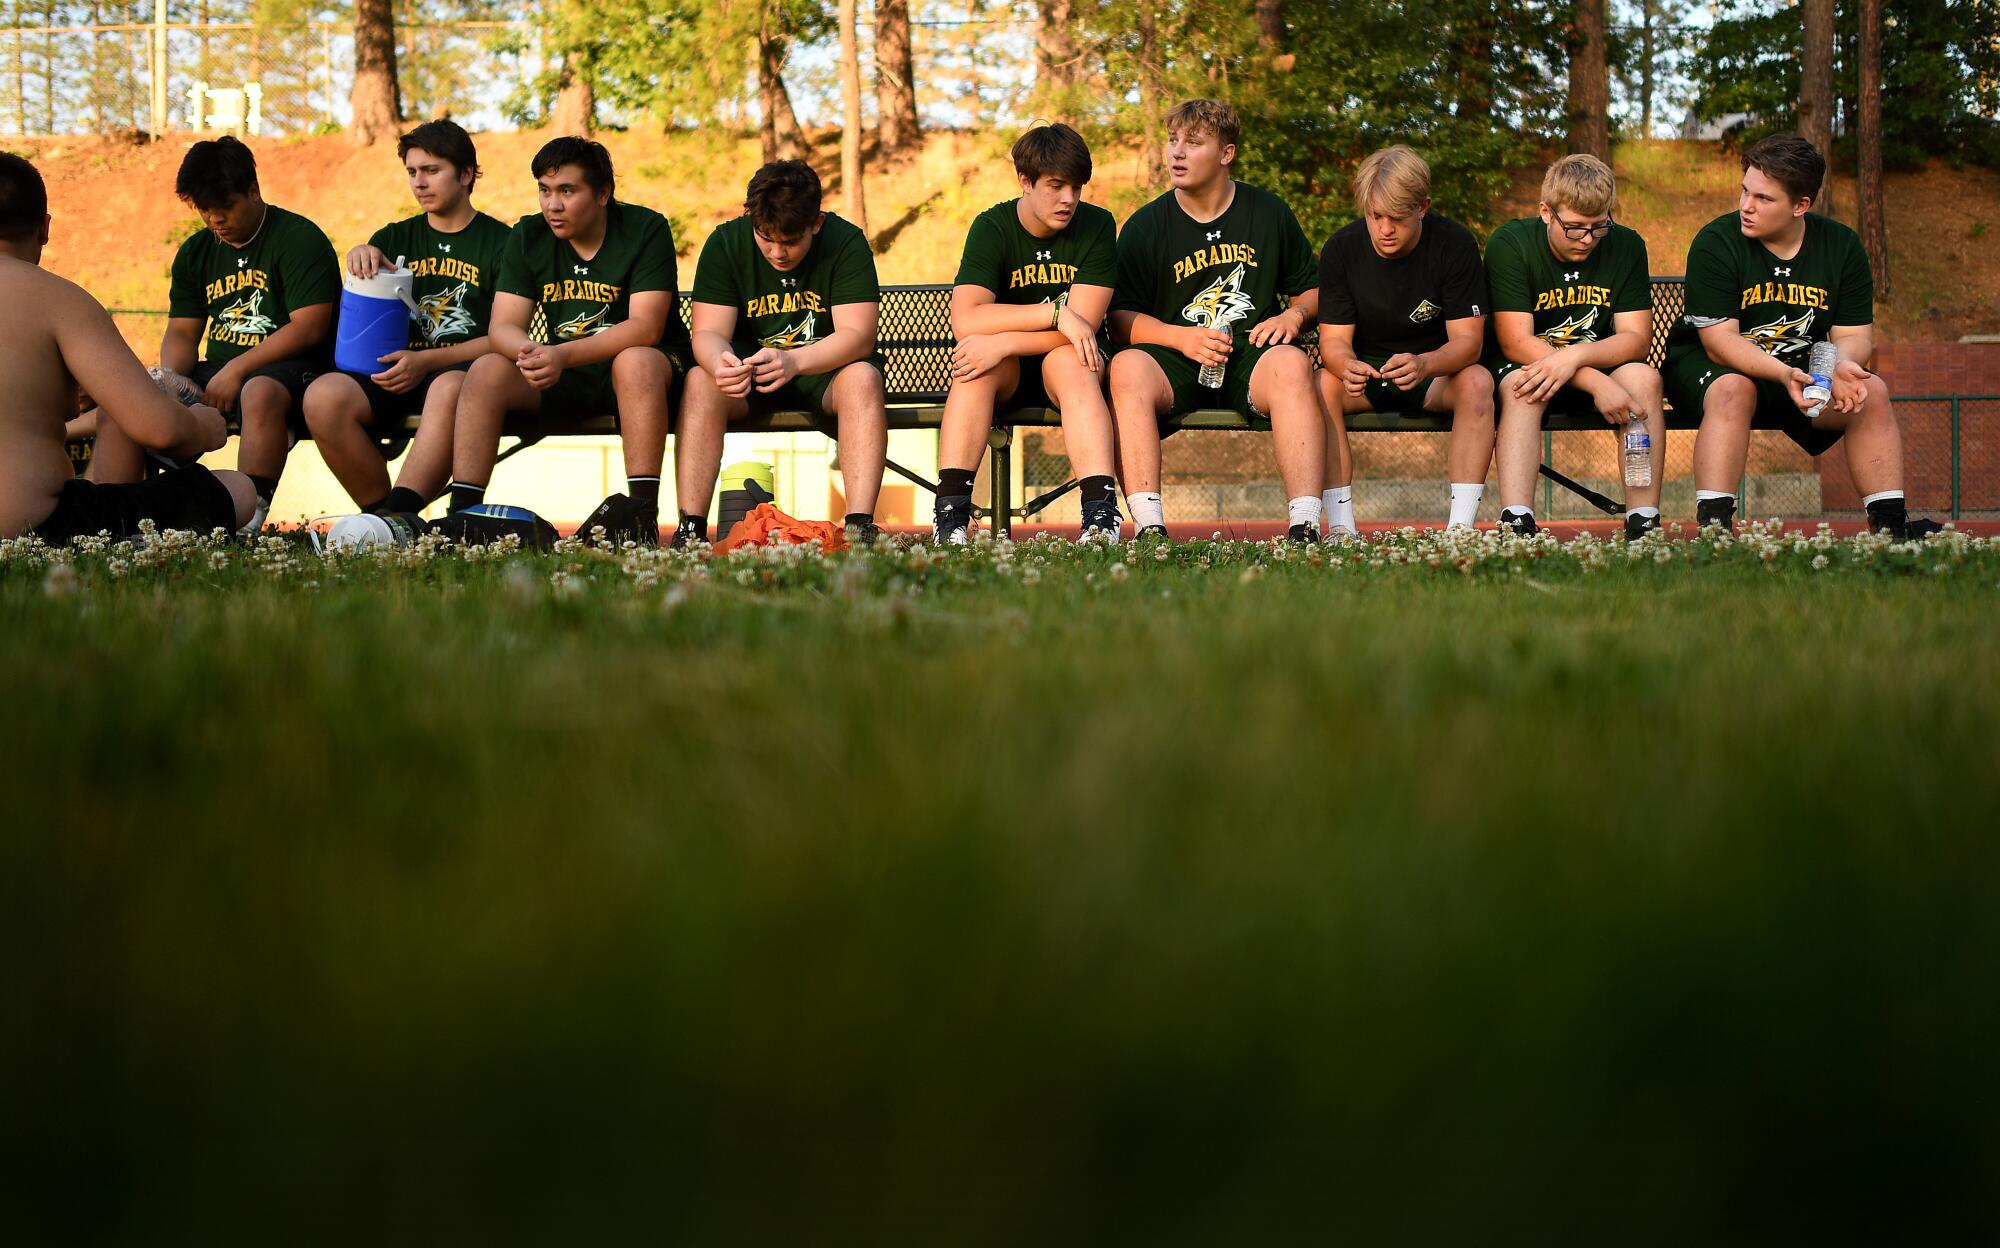 Paradise football players take a break during a team training camp session.